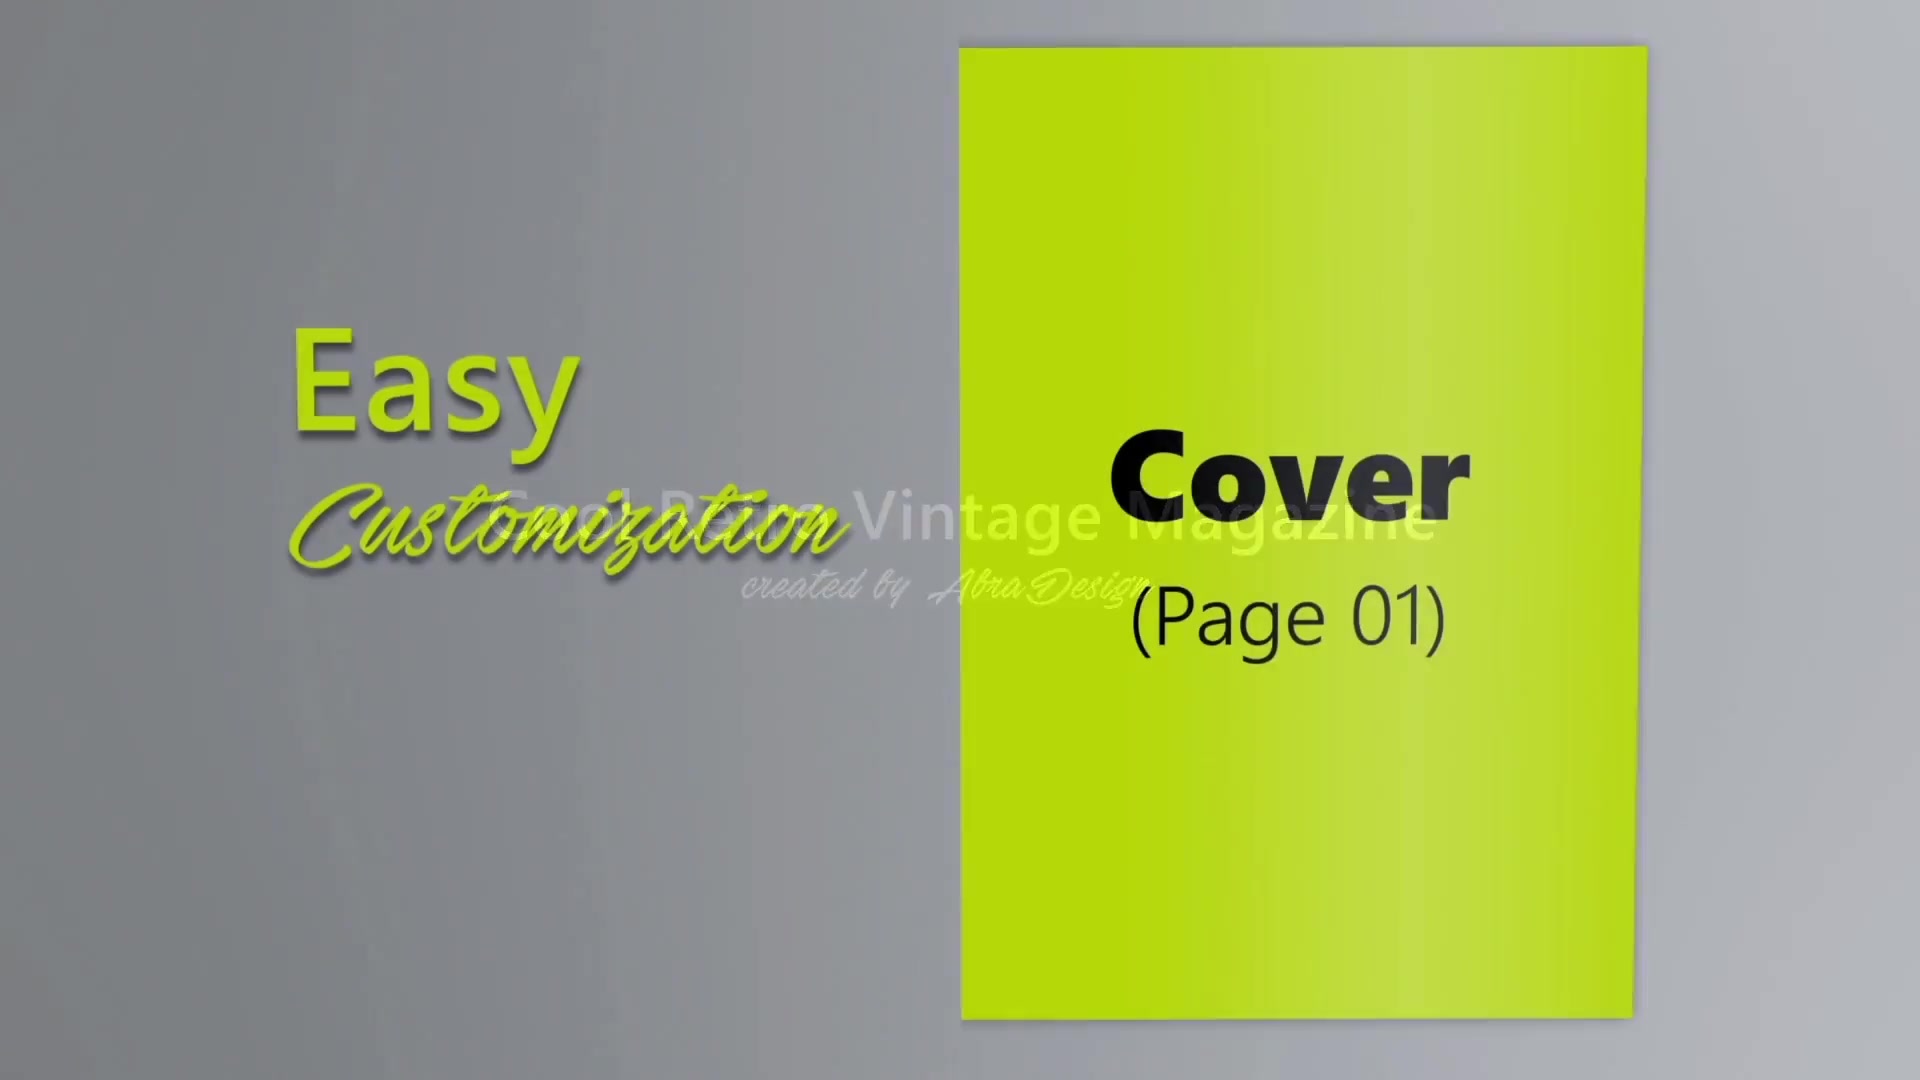 book cover animation after effects template free download